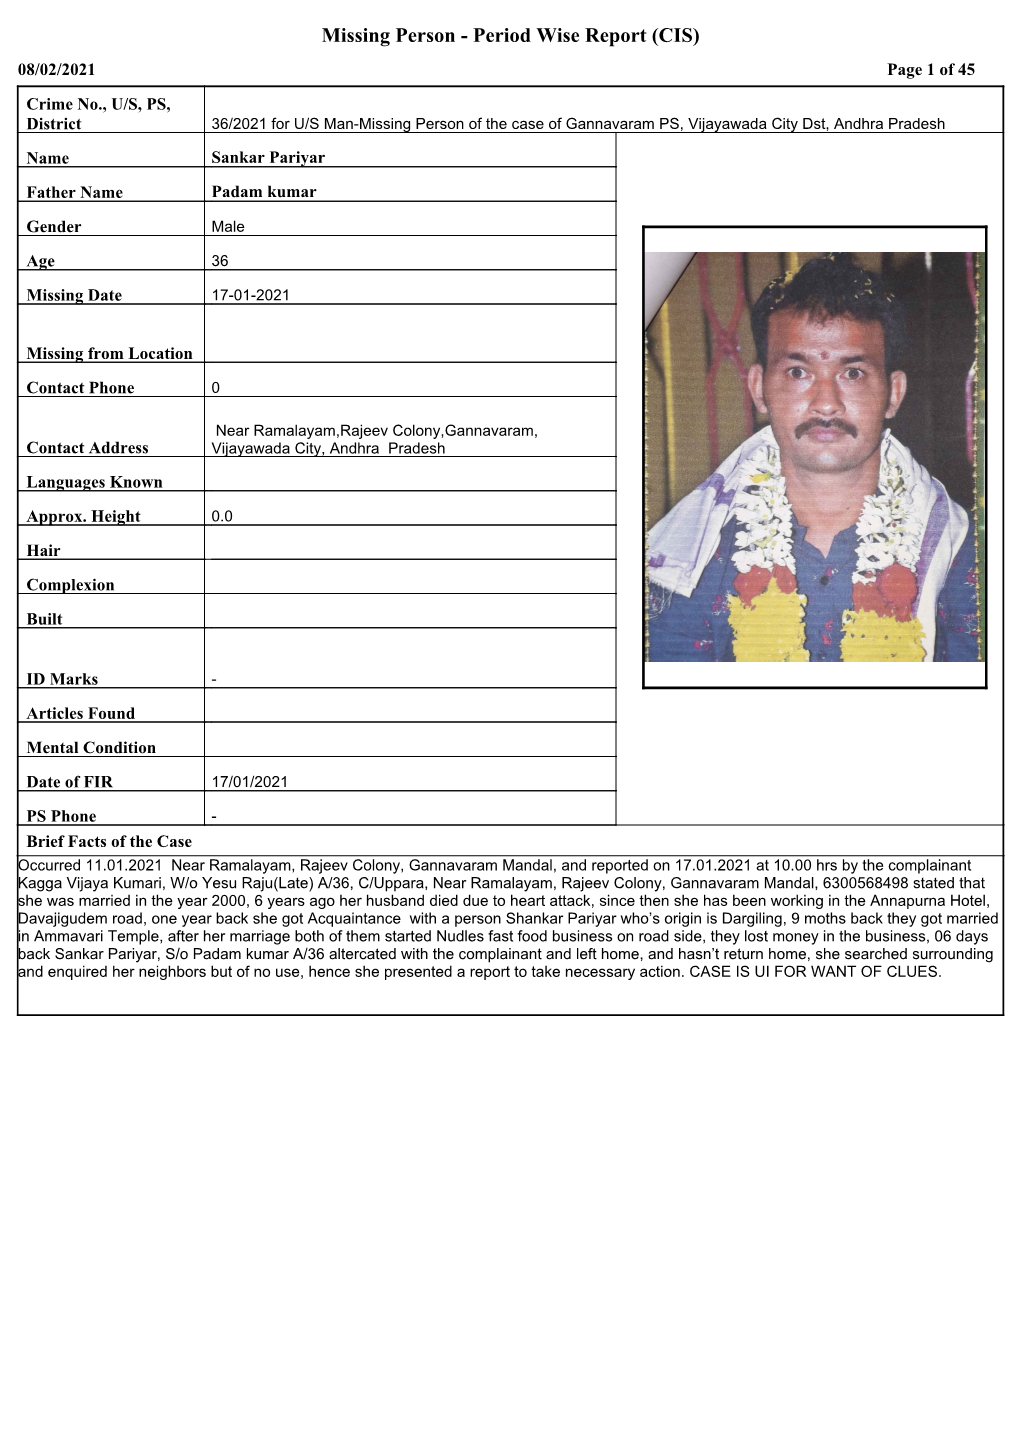 Missing Person - Period Wise Report (CIS) 08/02/2021 Page 1 of 45